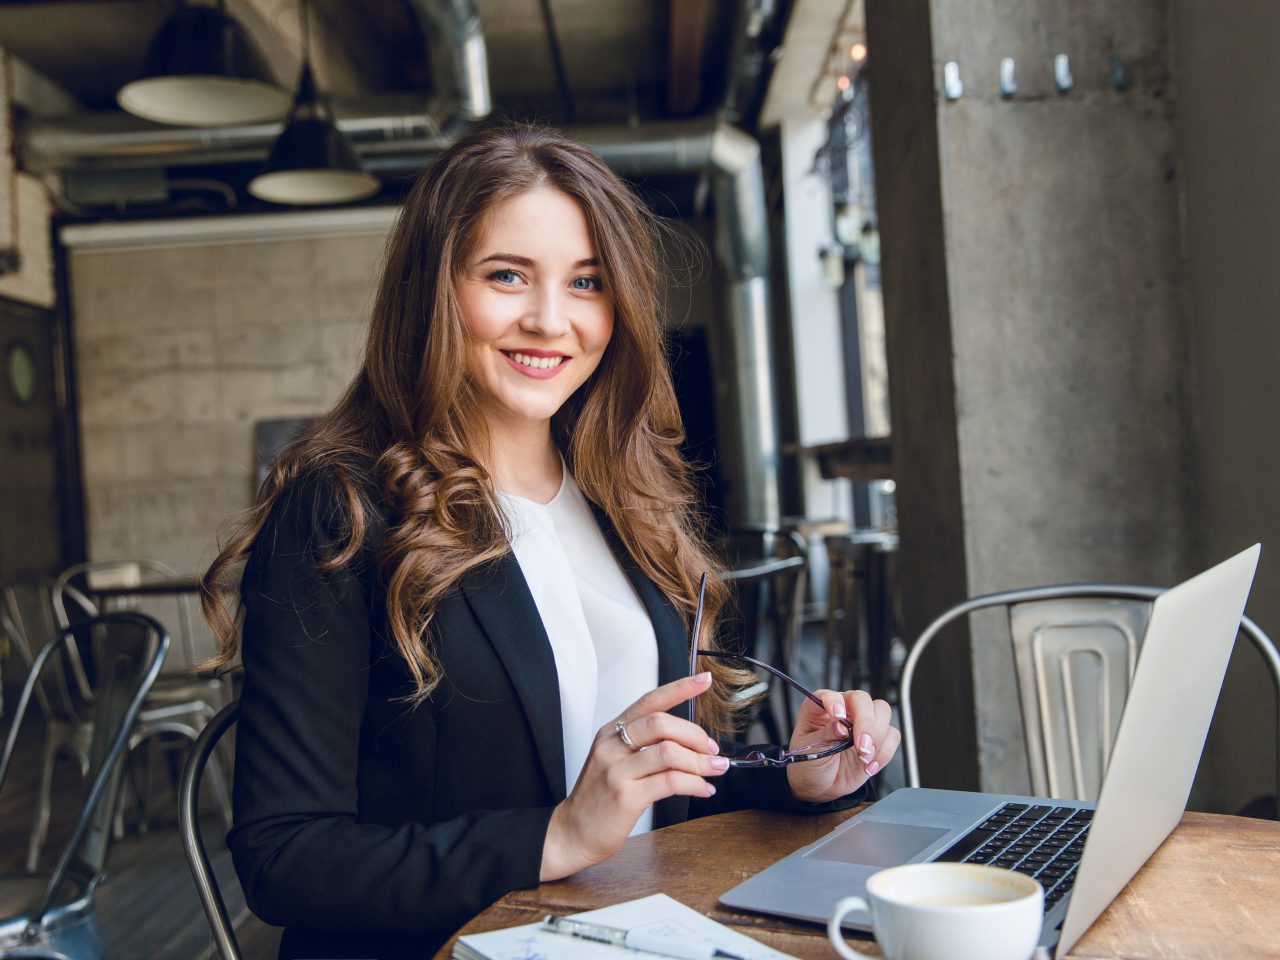 Widely smiling businesswoman working on laptop sitting in a cafe. Woman with long hair wears black jacket and white blouse and holds black eyeglasses in hands.